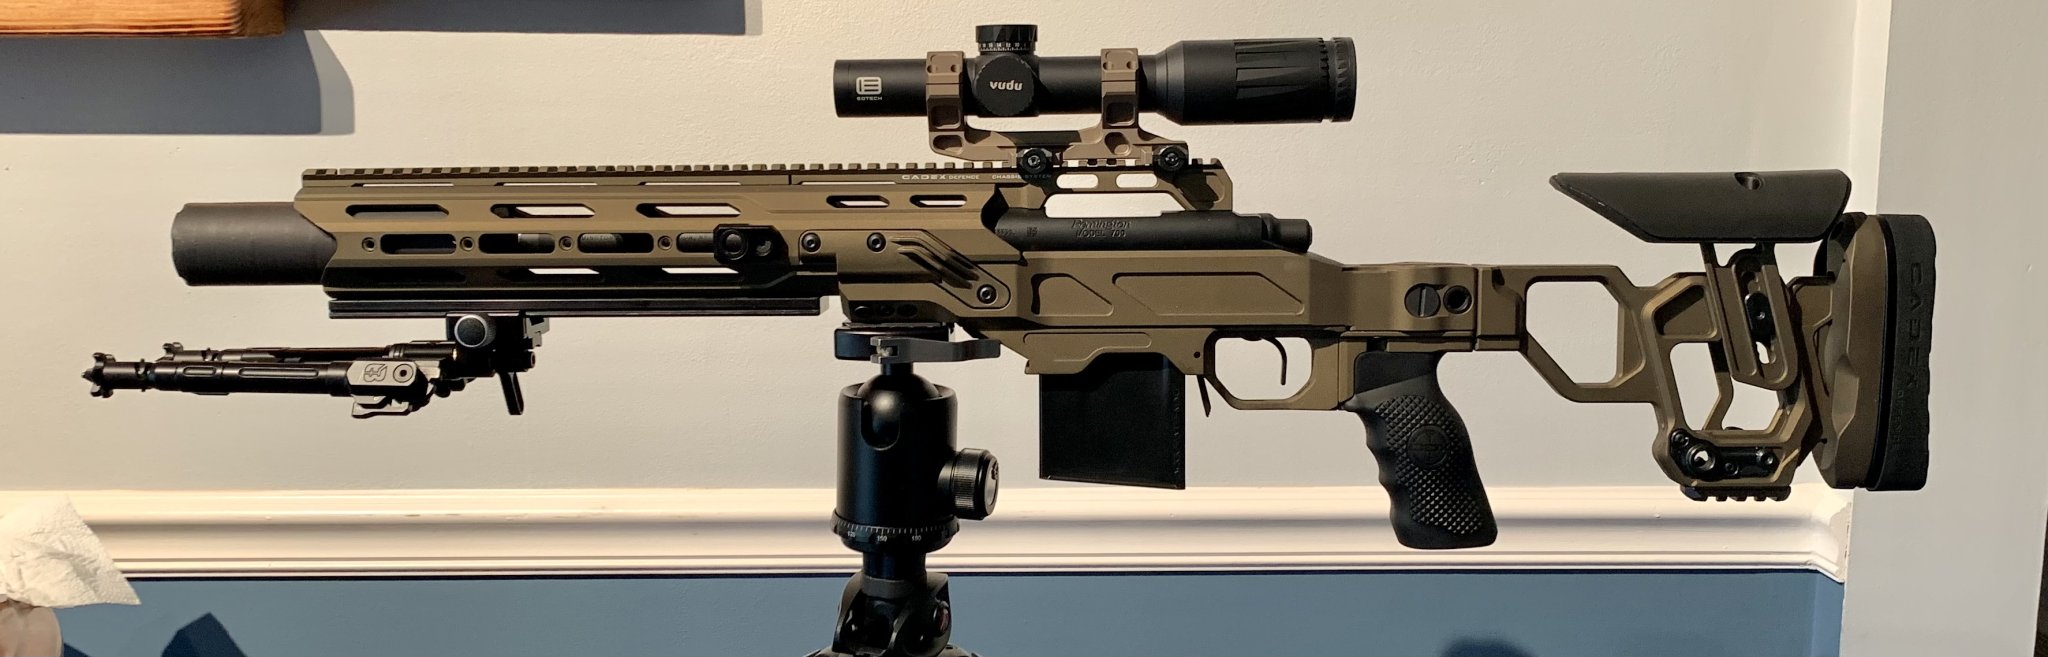 Cadex MX1 Muzzle brake  This video was send by one of our happy customers  in Thaïland. He shoots a Rem 700 5R fitted in a Dual Strike chassis and a  Cadex